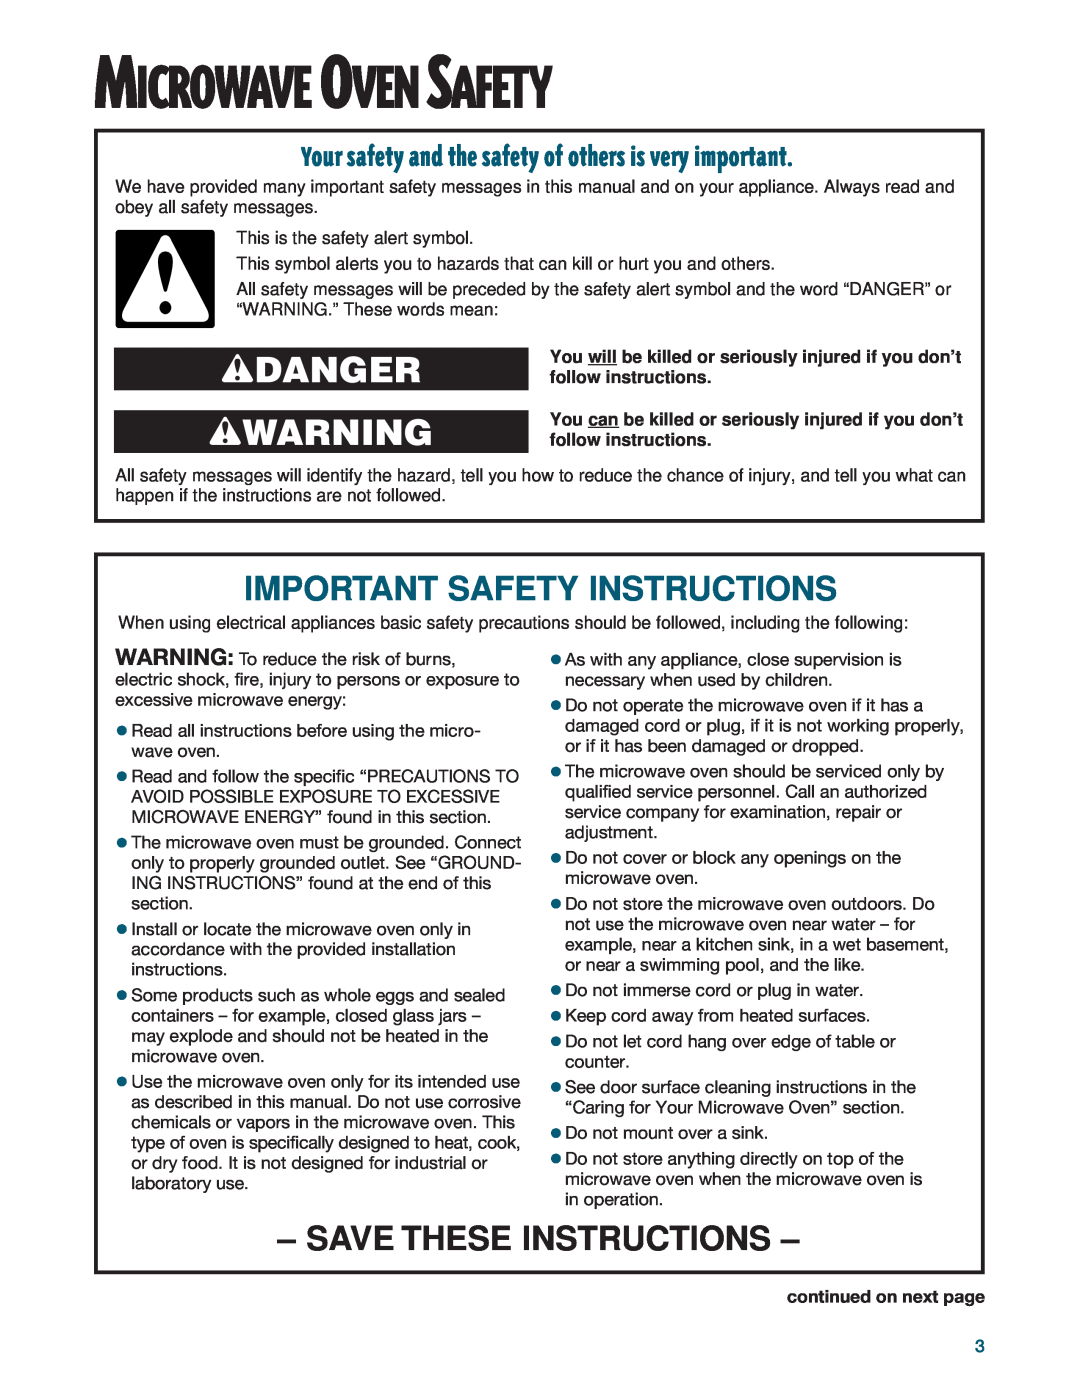 Whirlpool YMH6140XF wDANGER wWARNING, Important Safety Instructions, Save These Instructions, Microwave Oven Safety 